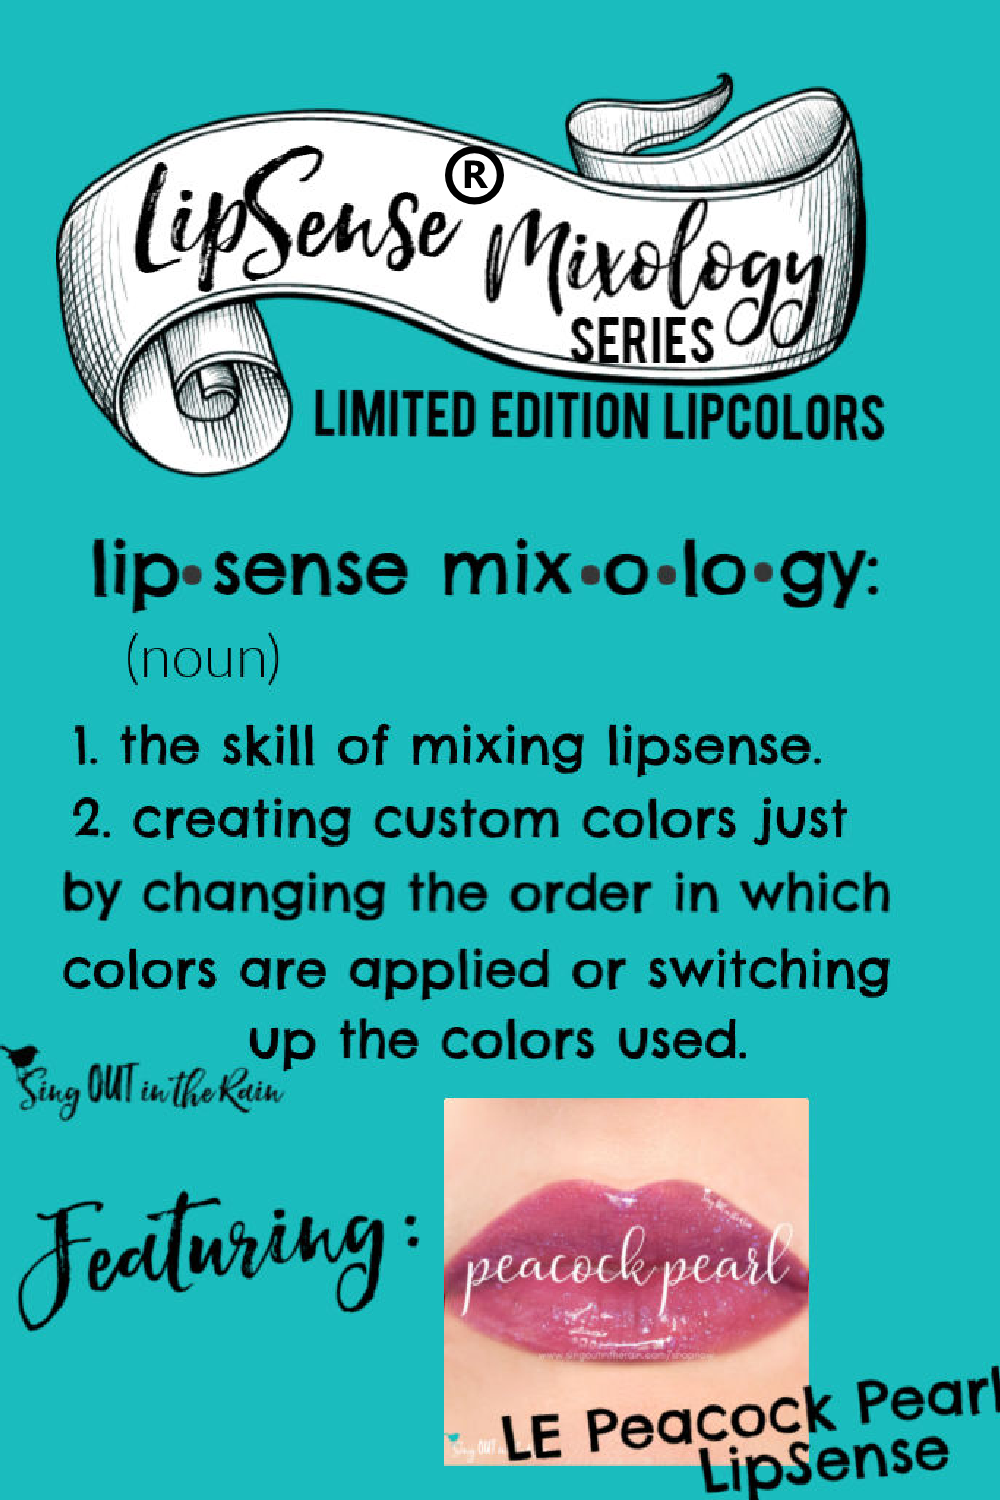 The Ultimate Guide to Peacock Pearl LipSense Mixology